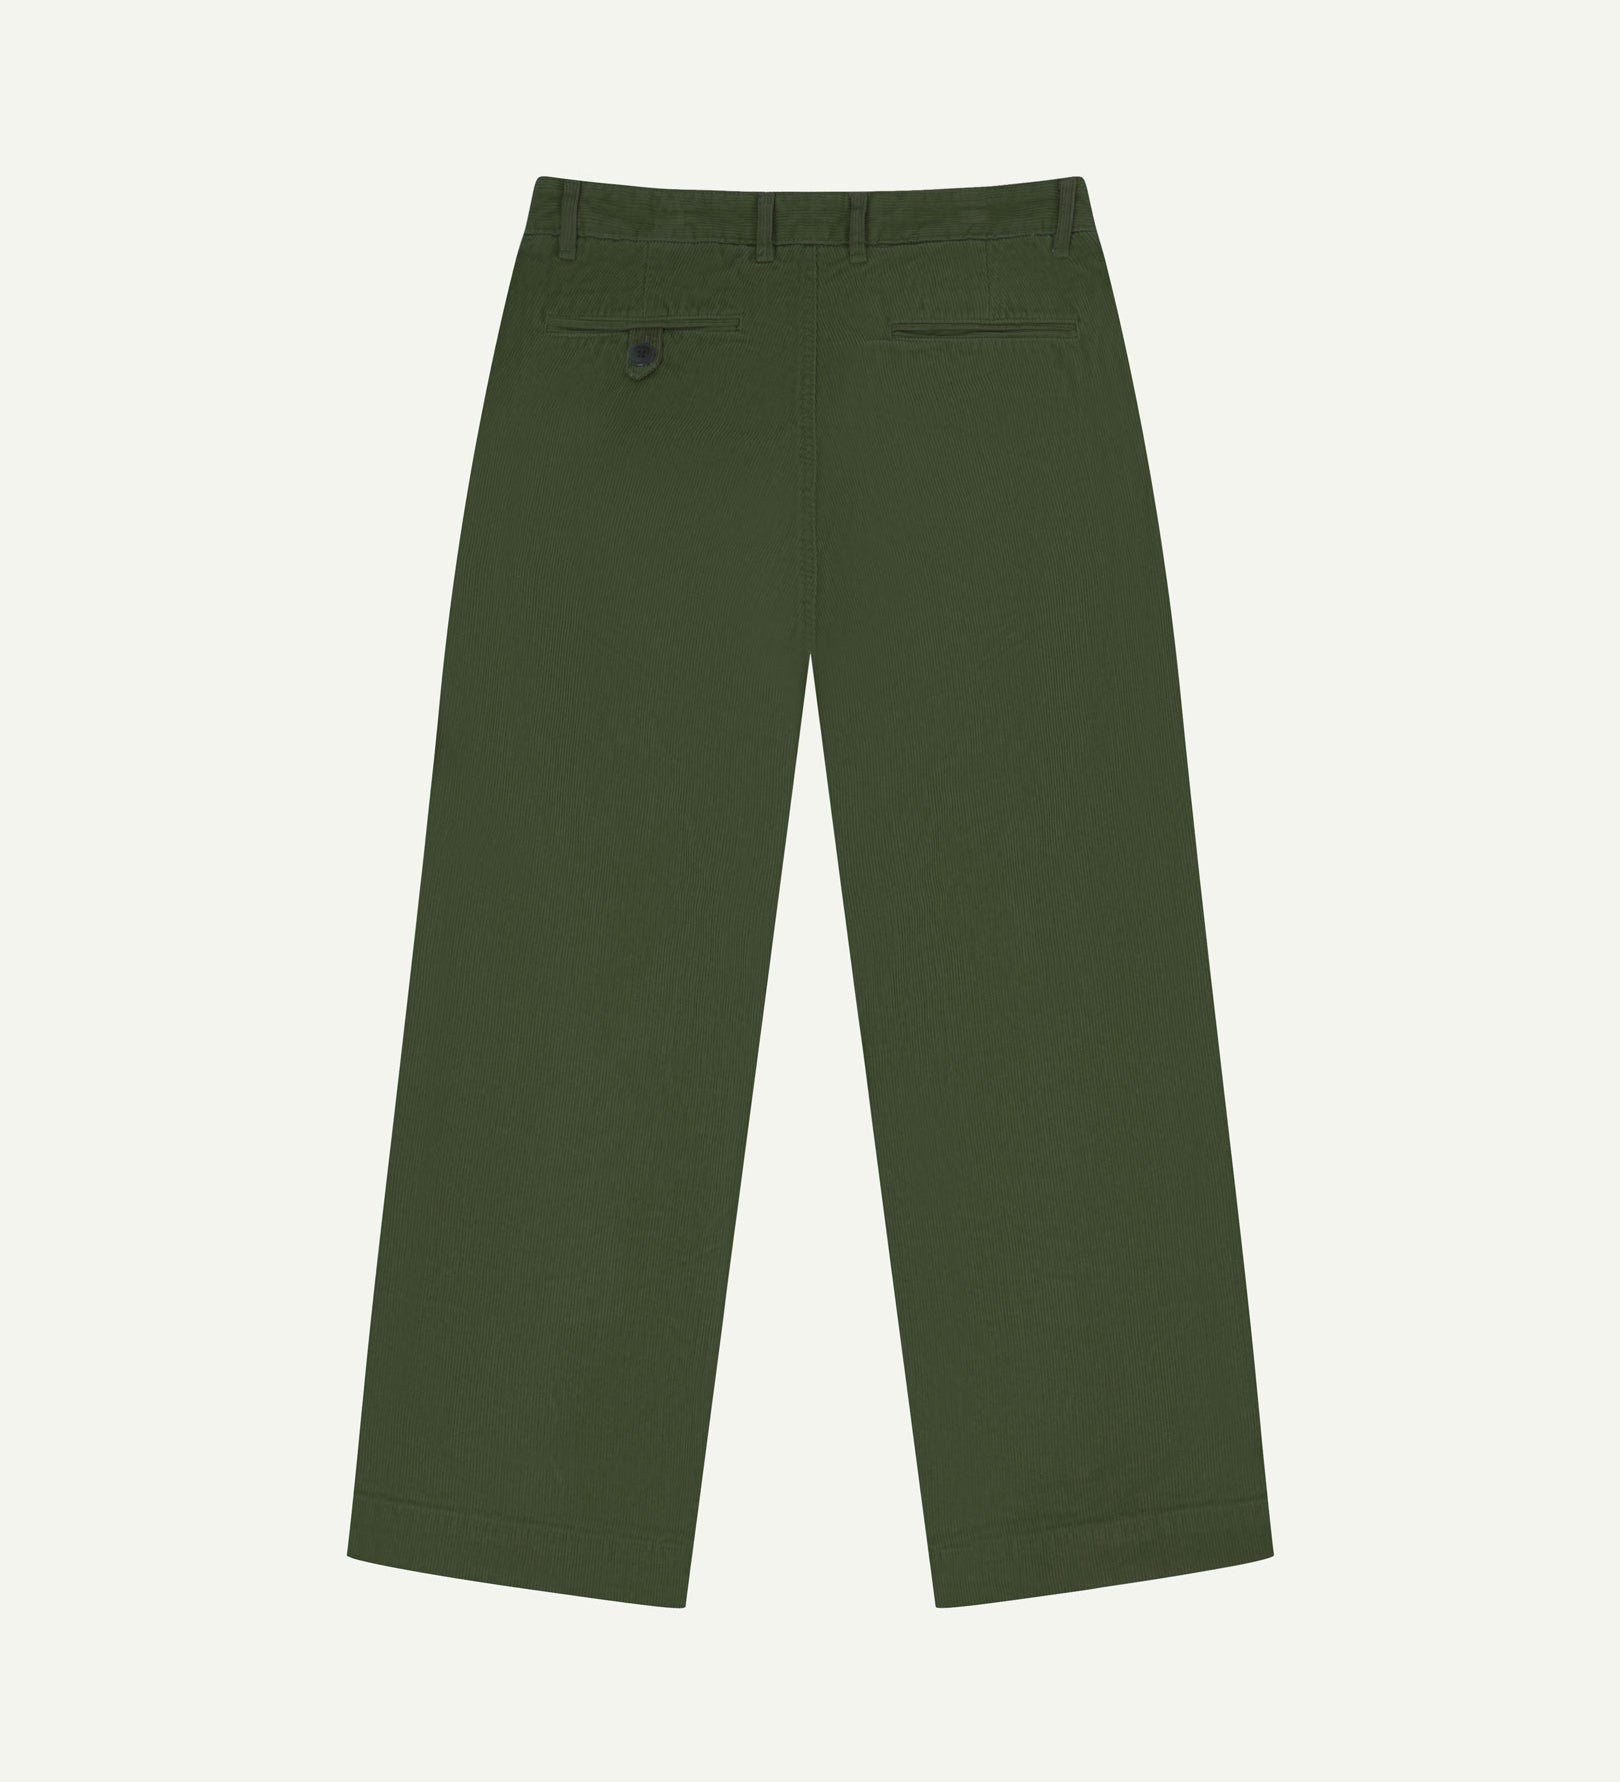 Back flat view of Uskees 5018 cord boat pants in coriander green showing belt loops, back pockets and simple, vintage silhouette.